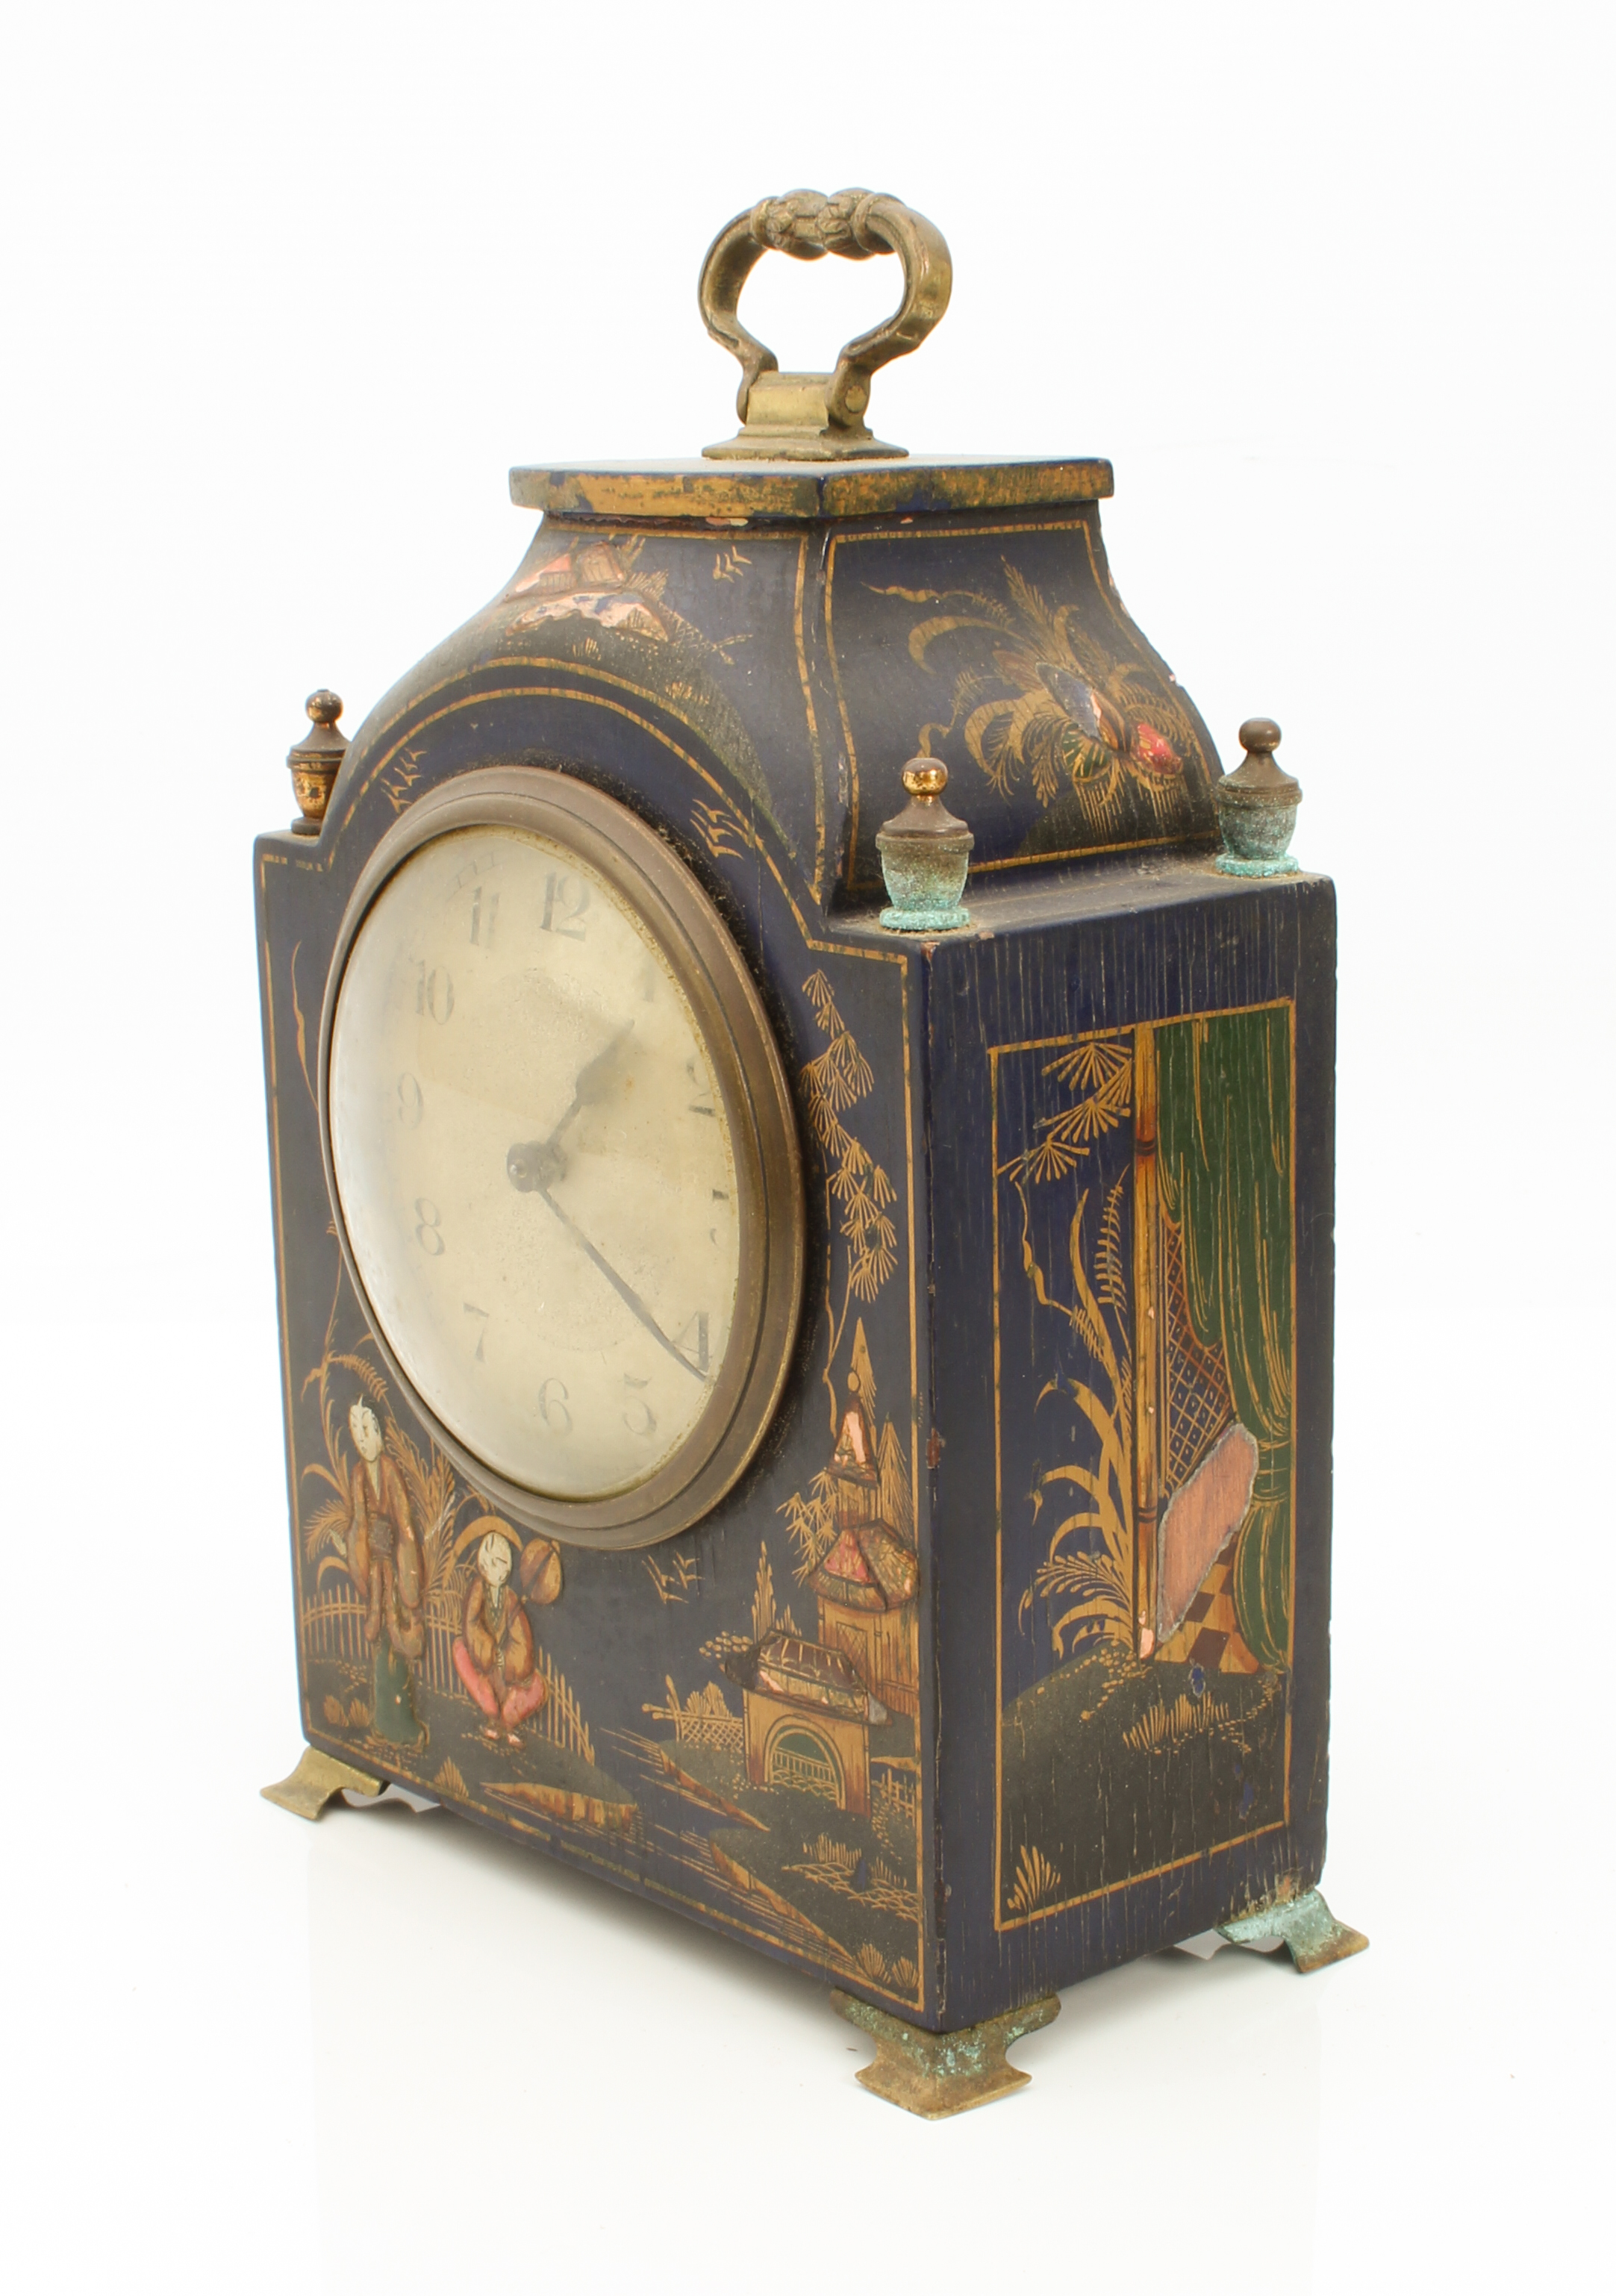 A brass-mounted desk or mantel clock in the Chinoiserie style - late-19th century, silvered 3¼ in - Image 2 of 10